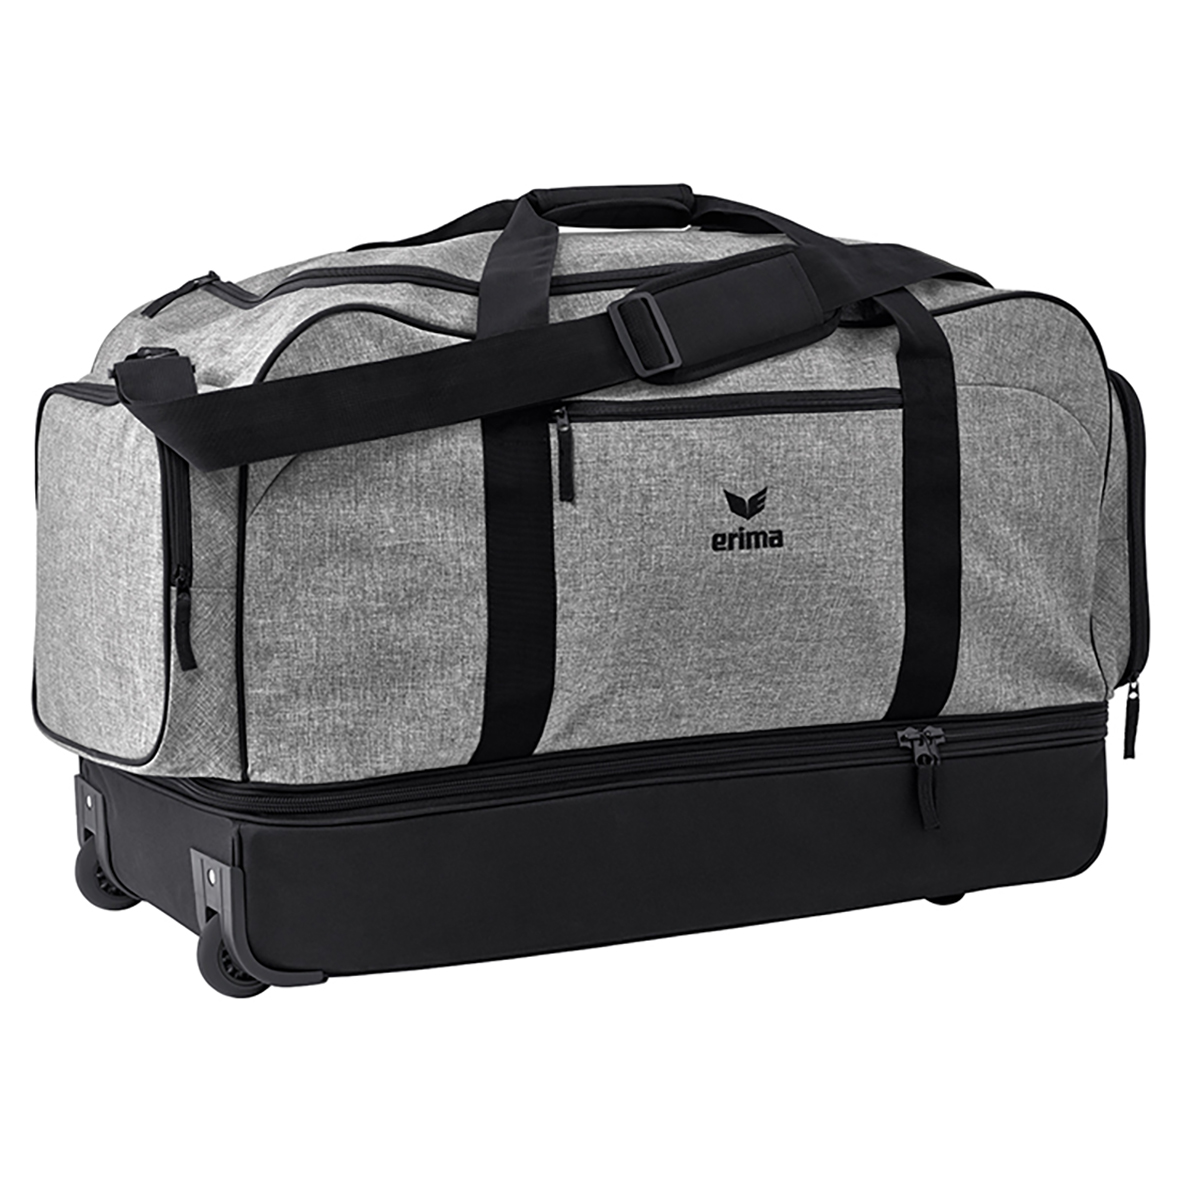 ERIMA TRAVEL LINE WHEELED BAG WITH  BOTTOM COMPARTMENT.